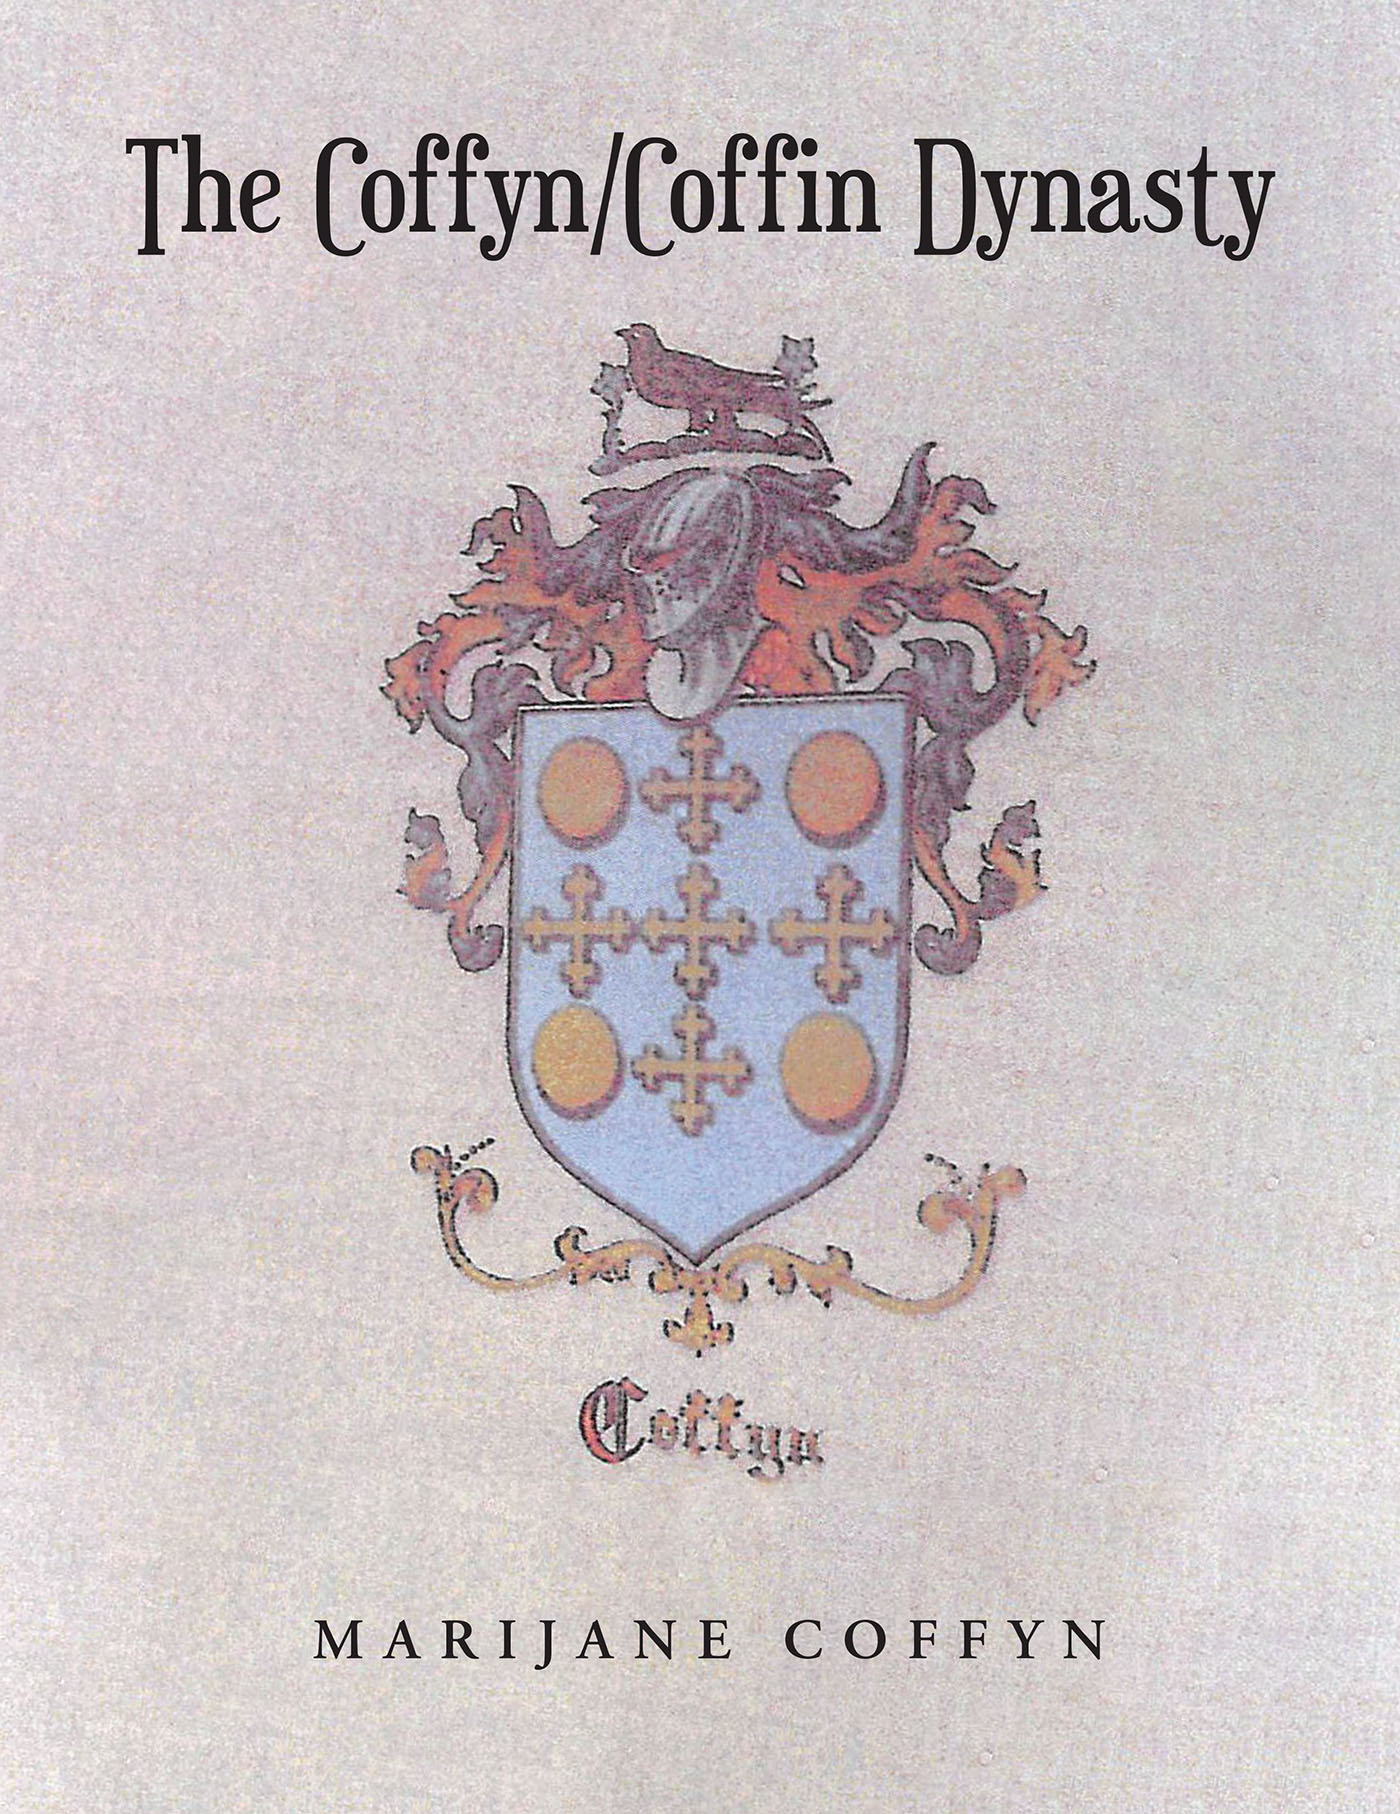 Marijane Coffyn’s Newly Released "The Coffyn/Coffin Dynasty" is a Fascinating Genealogical Study of a Prolific and Impressive Family